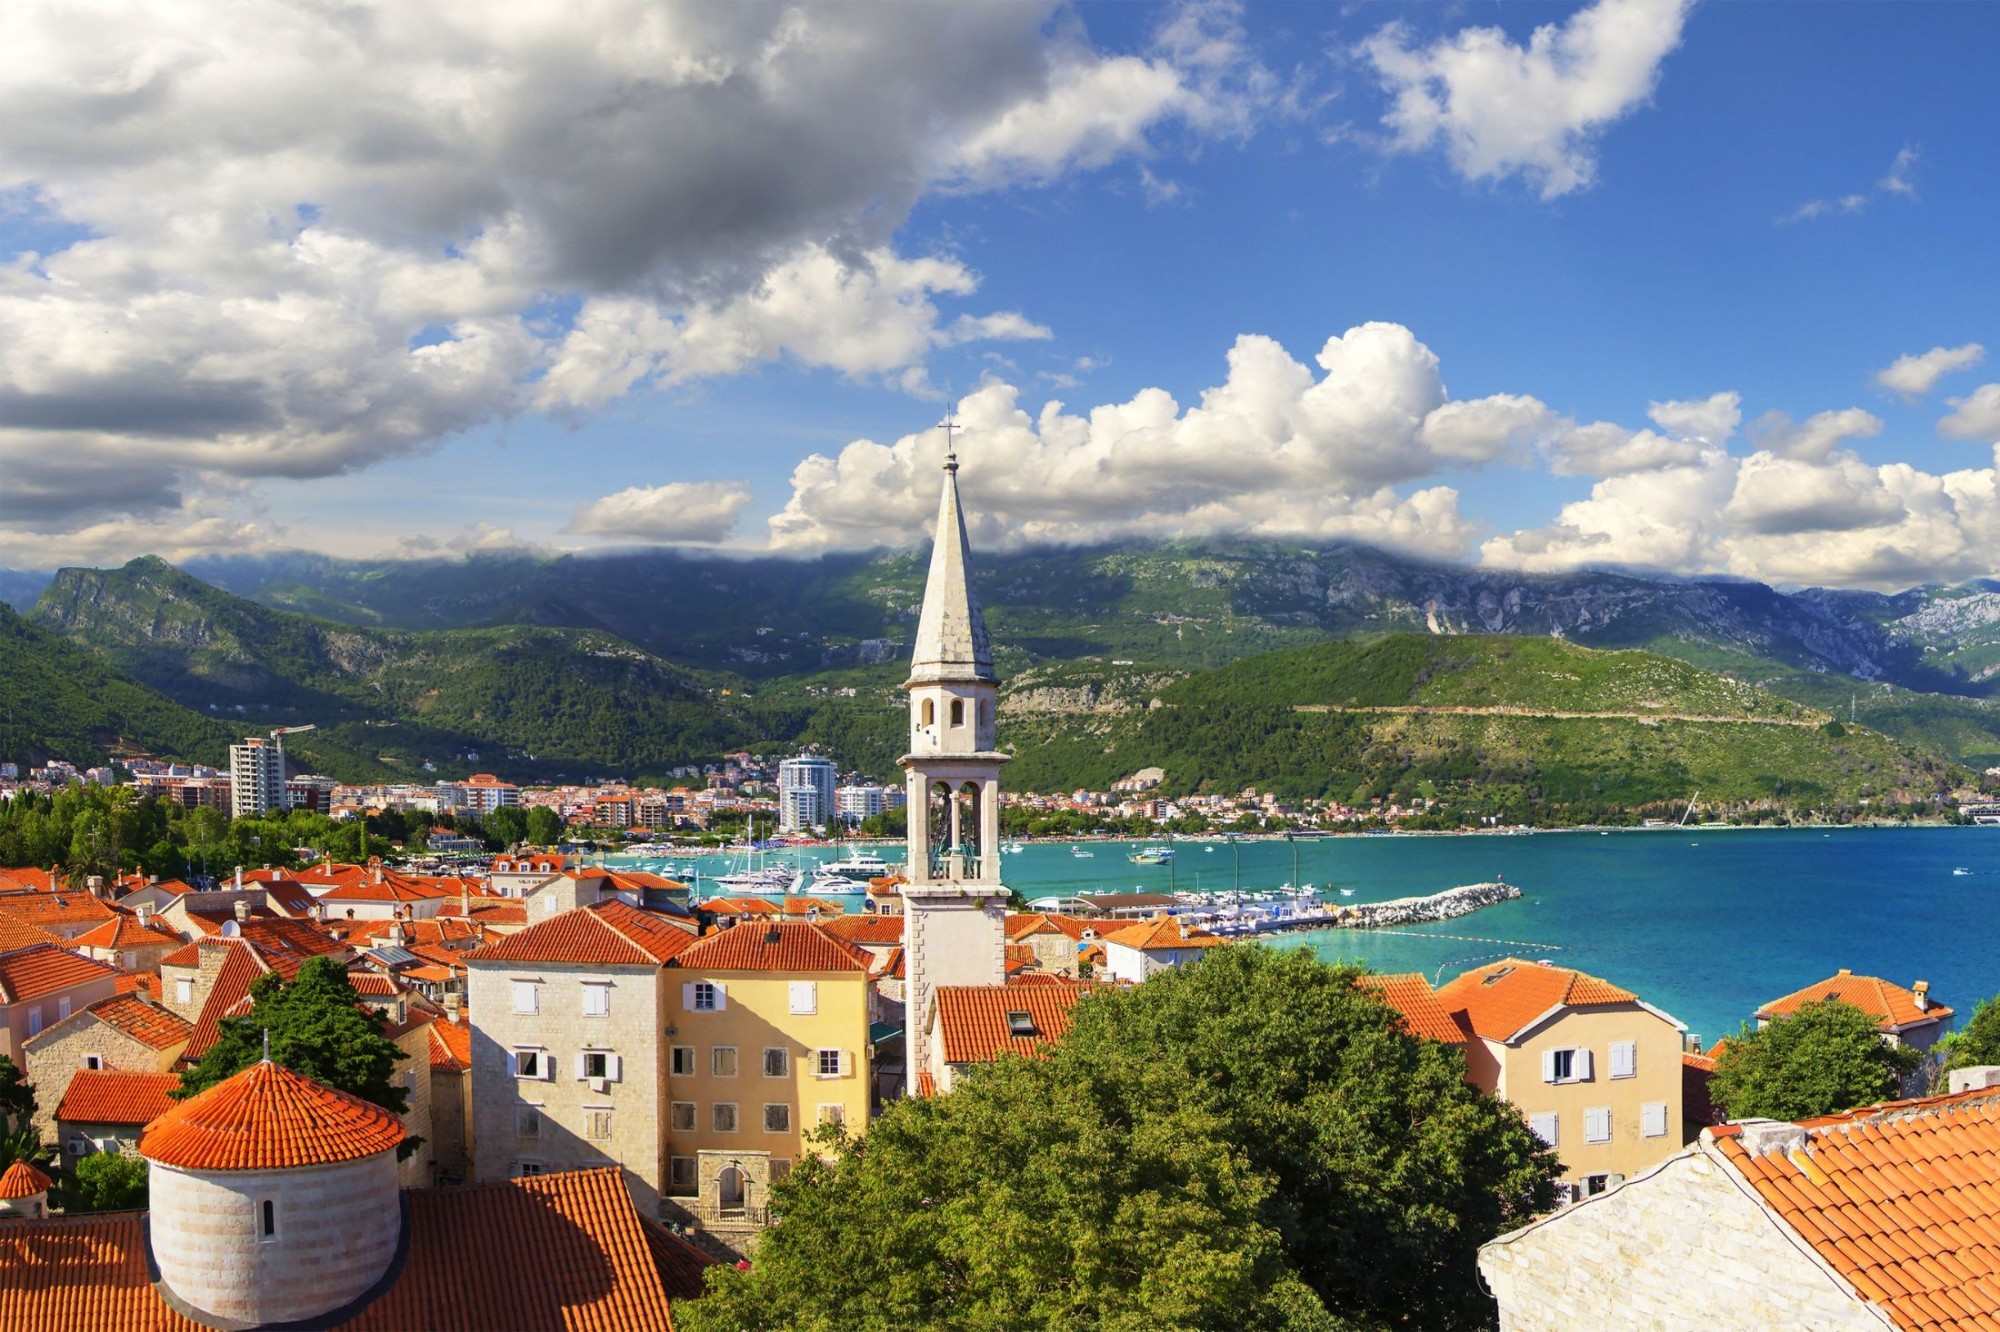 Budva - a top place to visit in Montenegro